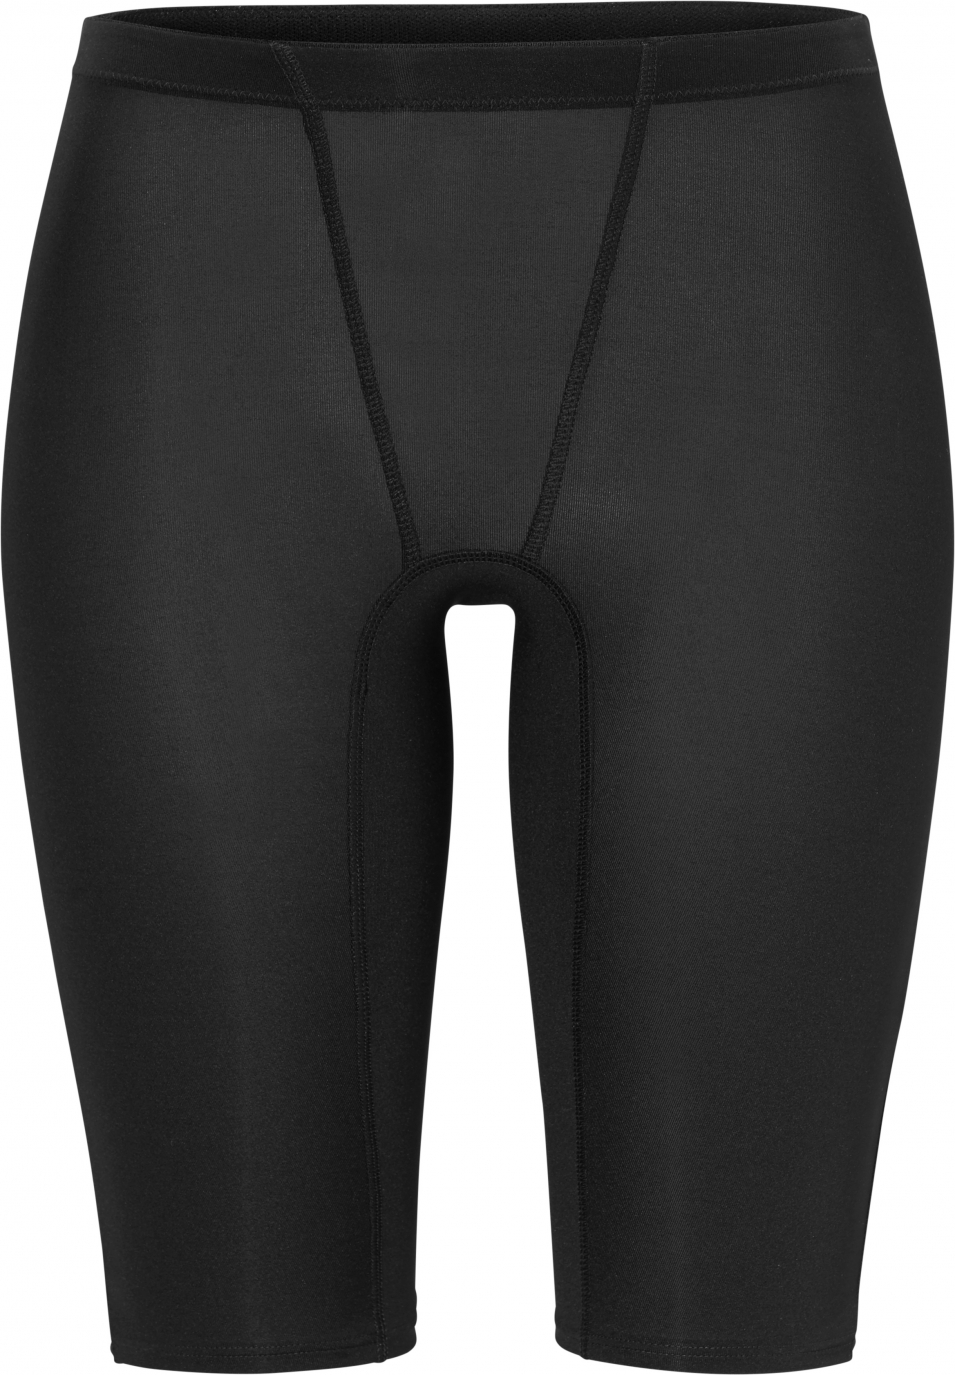  Thermocool panty with long legs, Black